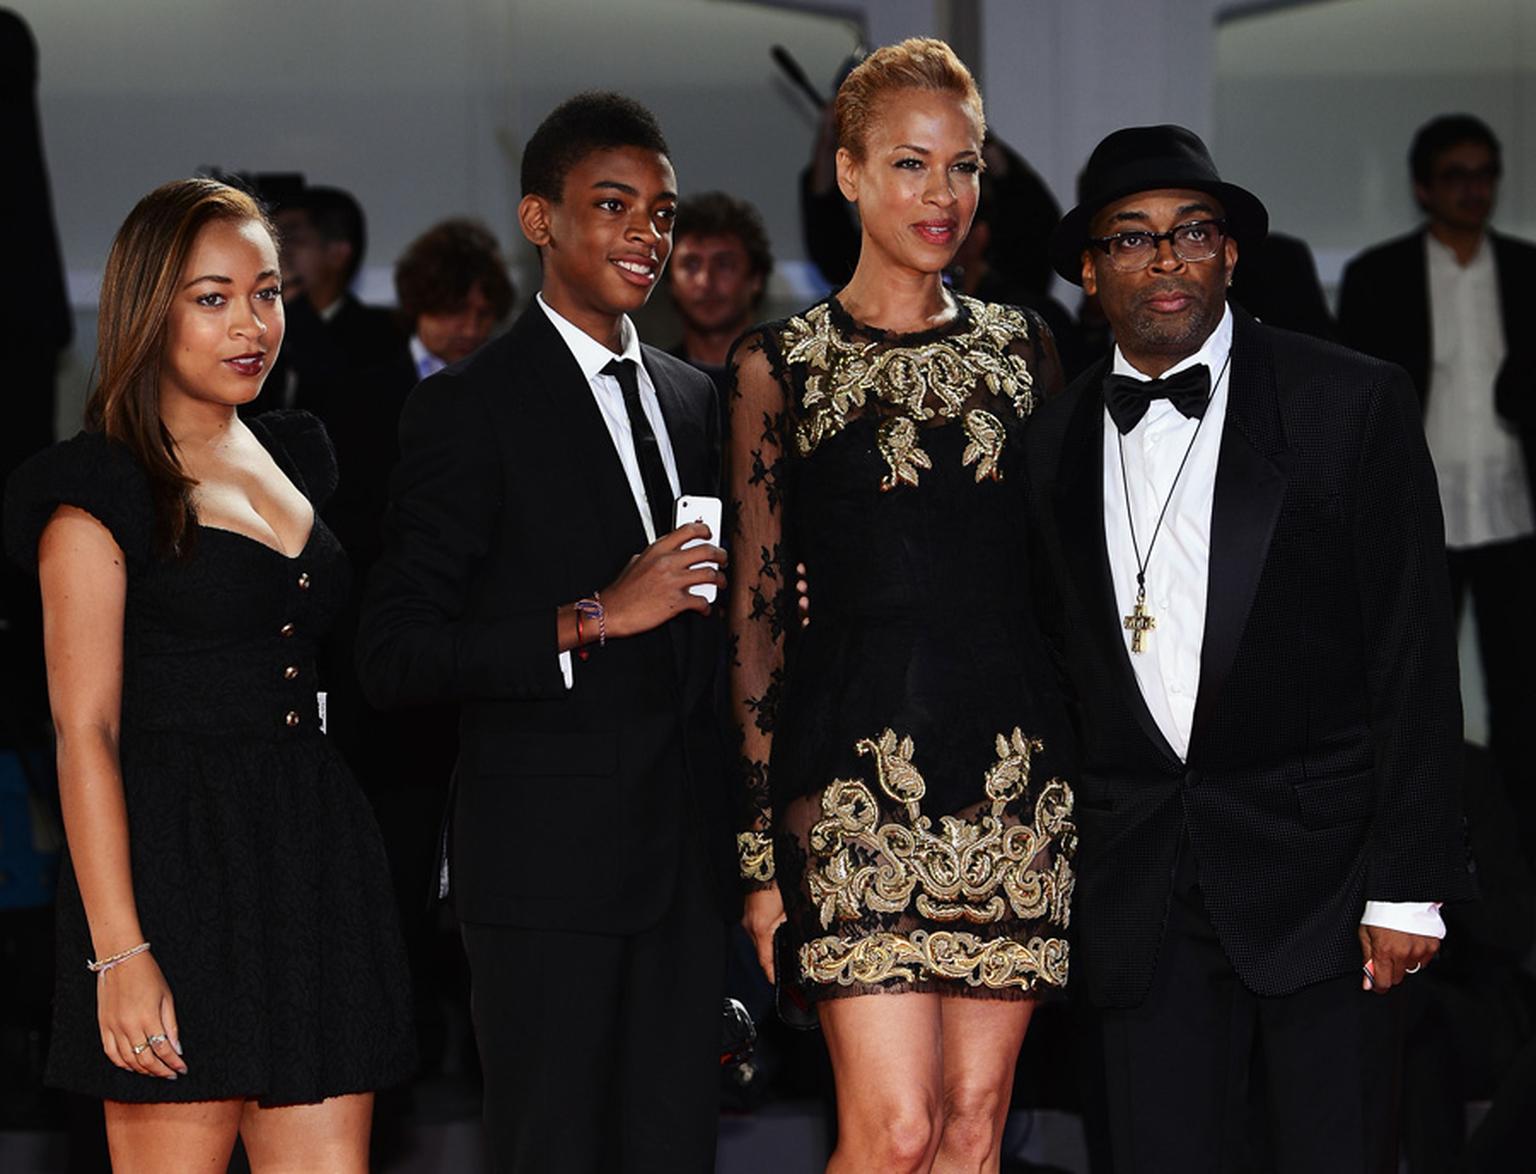 JLC-Director-Spike-Lee-and-his-daughter-Satchel-Lee-son-Jackson-Lee-and-wife-Tonya-Lewis-attend-the-Bad-and-Jaeger-Le-Coultre--Glory-To-The-Filmmaker-2012-Award-during-the-69th-Venice-Film-Festival